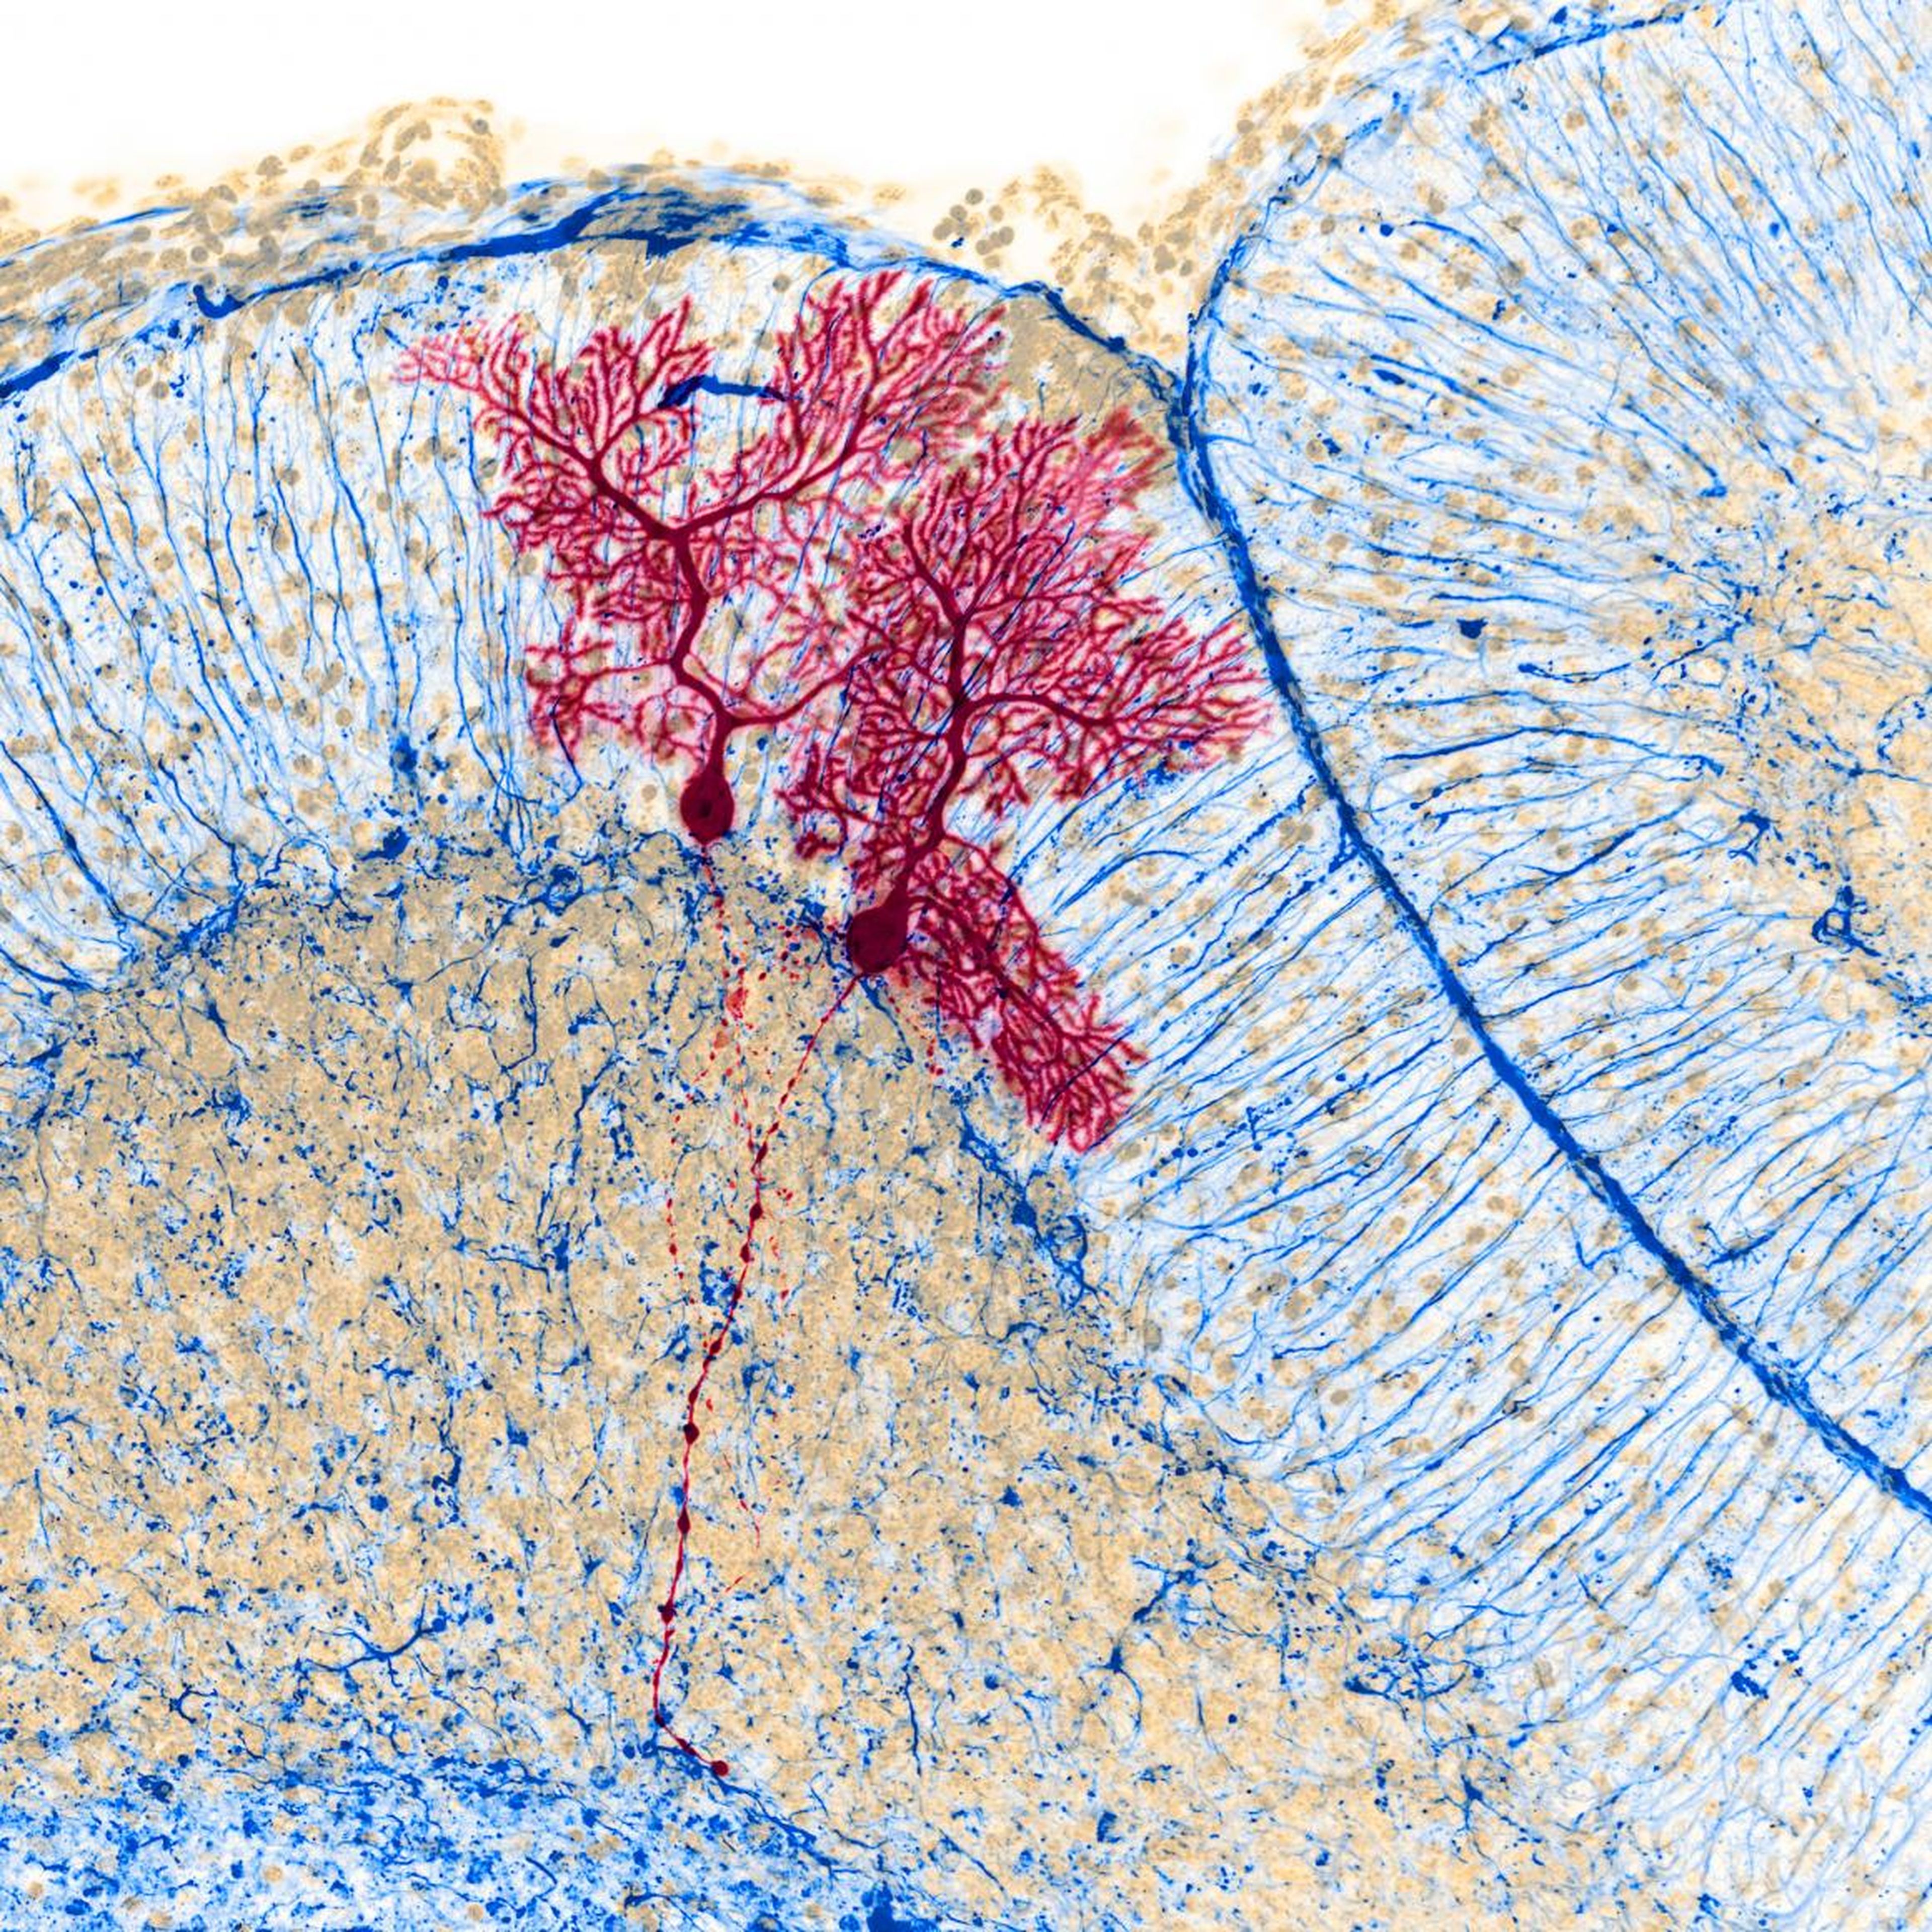 Dye-injected nerve cells inside a mouse's brain.